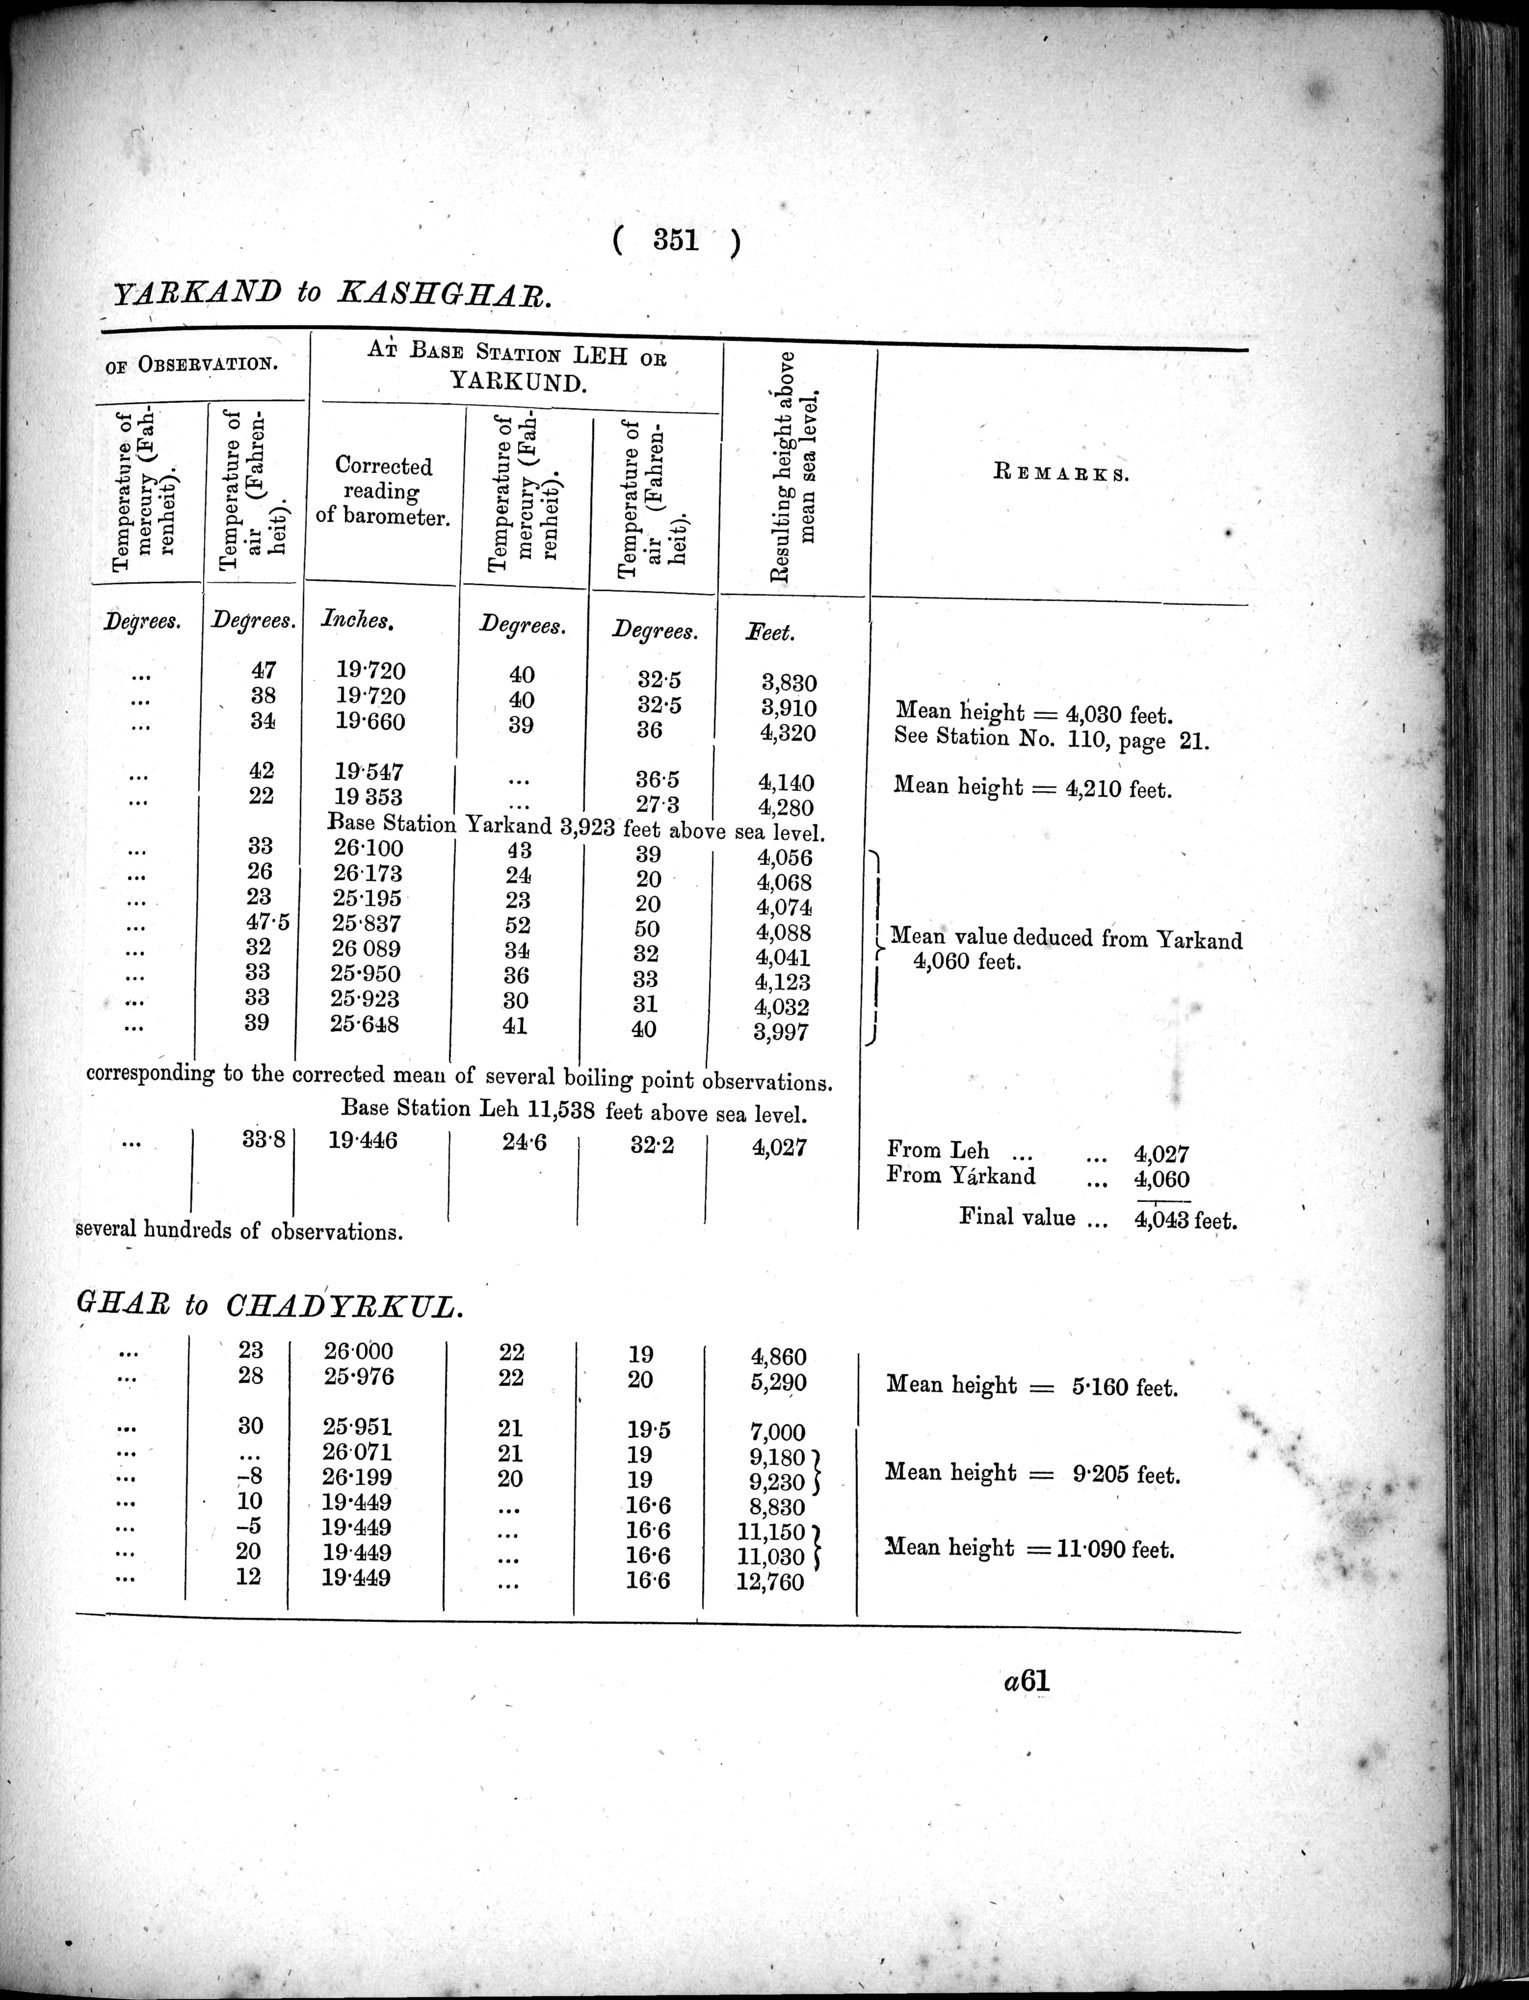 Report of a Mission to Yarkund in 1873 : vol.1 / Page 485 (Grayscale High Resolution Image)